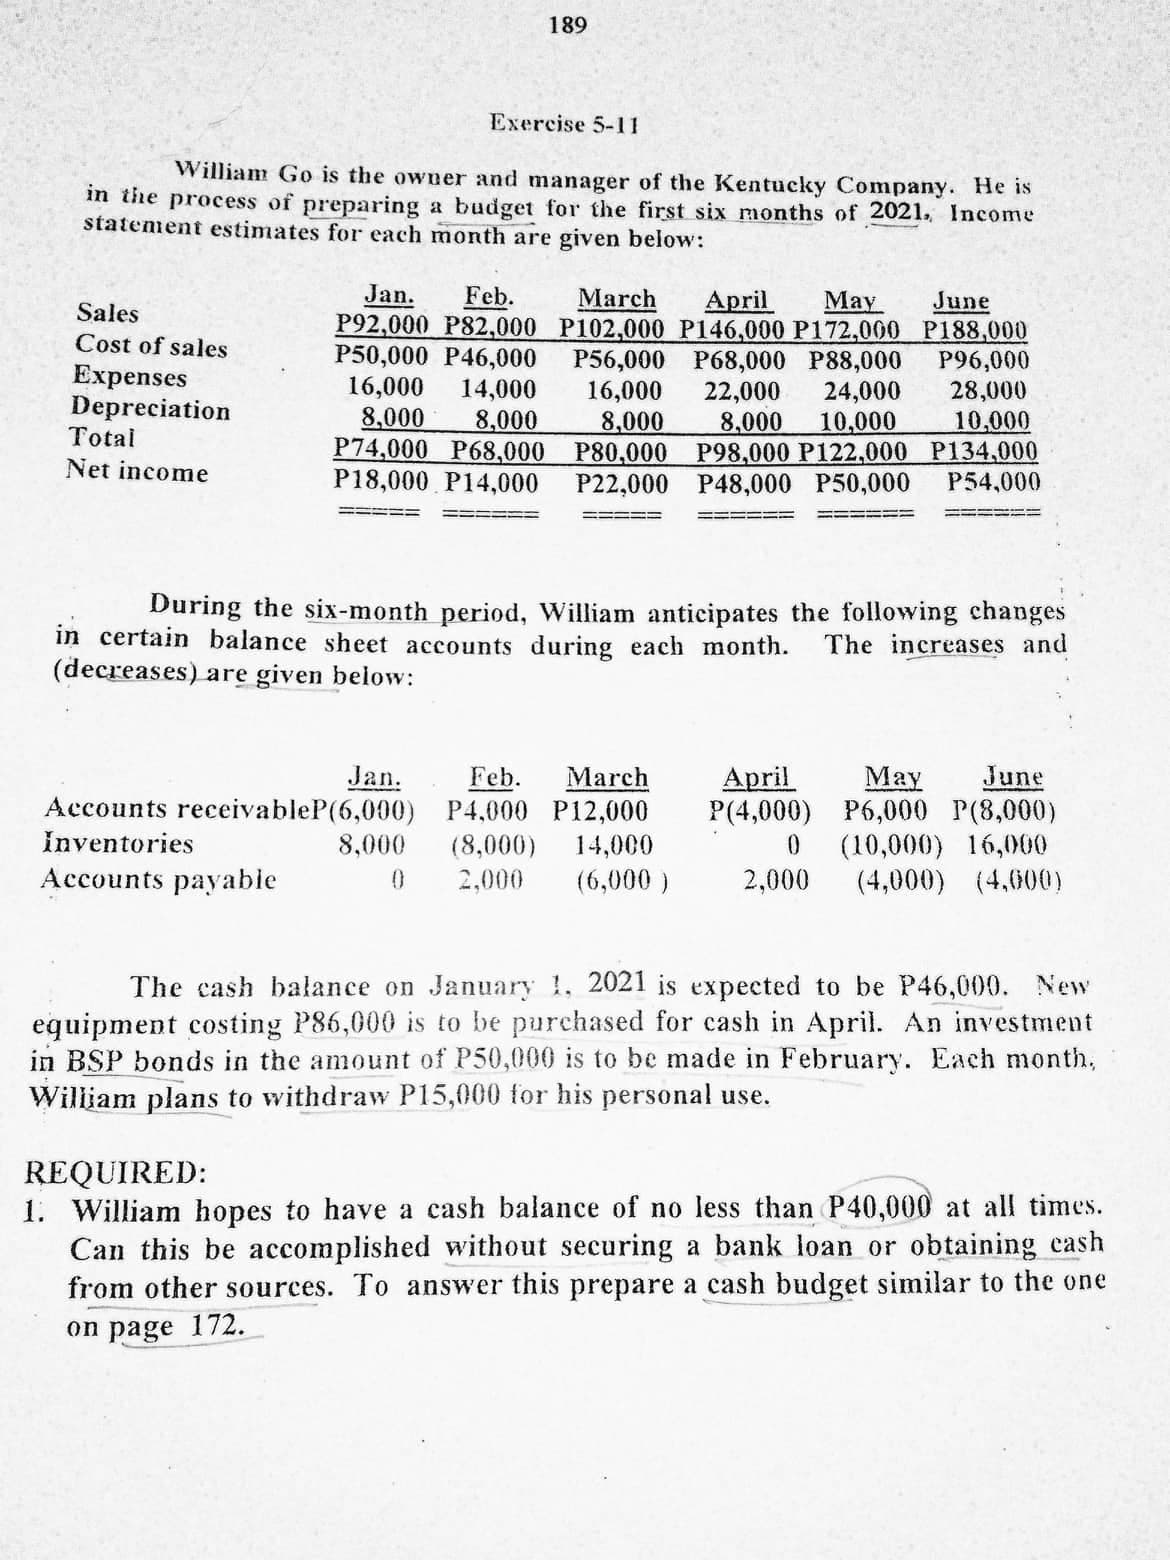 189
Exercise 5-11
William Go is the owner and manager of the Kentucky Company. He is
in the process of preparing a budget for the first six months of 2021, Income
statement estimates for each month are given below:
Jan.
Feb.
May
March
P92,000 P82,000 P102,000 P146,000 P172,000 P188,000
P50,000 P46,000 P56,000 P68,000 P88,000
April
June
Sales
Cost of sales
P96,000
28,000
Expenses
Depreciation
Total
16,000
8,000
P74,000 P68,000 P80,000
P18,000 P14,000
14,000
8,000
16,000
8,000
24,000
10,000
P98,000 P122,000 P134,000
22,000
8,000
10,000
Net income
P22,000 P48,000 P50,000
P54,000
in certain balance sheet accounts during each month.
(decreases) are given below:
During the six-month period, William anticipates the following changes
The increases and
March
Accounts receivableP(6,000) P4,000 P12,000
Jan.
Feb.
May
P(4,000) P6,000 P(8,000)
(10,000) 16,000
(4,000) (4,600)
April
June
Inventories
8,000
(8,000)
14,000
(6,000 )
Accounts payable
2,000
2,000
The cash balance on January 1, 2021 is expected to be P46,000. New
equipment costing P86,000 is to be purchased for cash in April. An investment
in BSP bonds in the amount of P50,000 is to be made in February. Each month,
William plans to withdraw Pl15,000 for his personal use.
REQUIRED:
1. William hopes to have a cash balance of no less than P40,000 at all times.
Can this be accomplished without securing a bank loan or obtaining cash
from other sources. To answer this prepare a cash budget similar to the one
on page 172.
